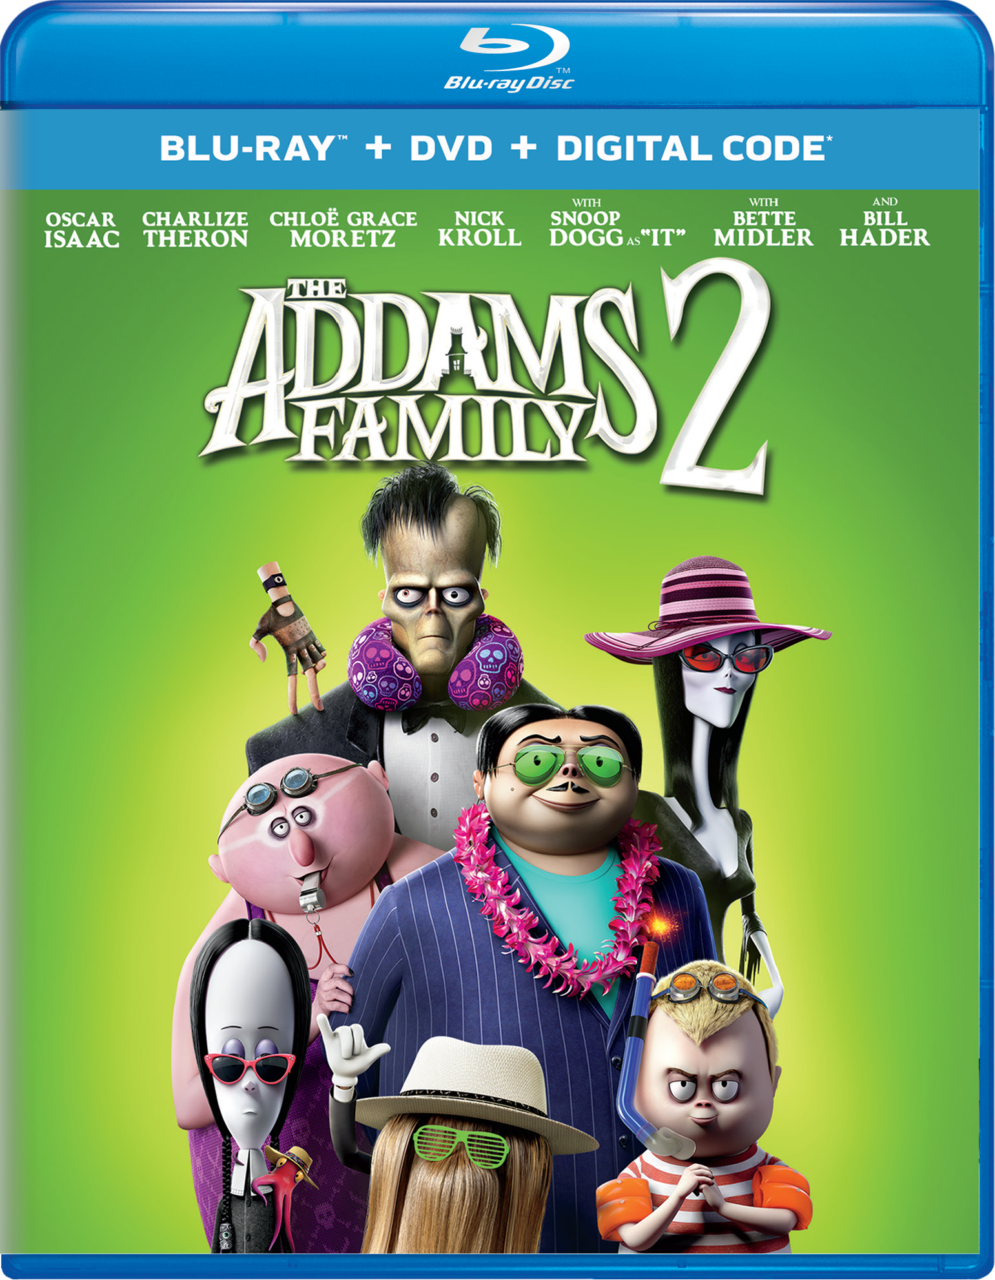 The Addams Family 2 Blu-Ray Combo Pack cover (Universal Pictures Home Entertainment)